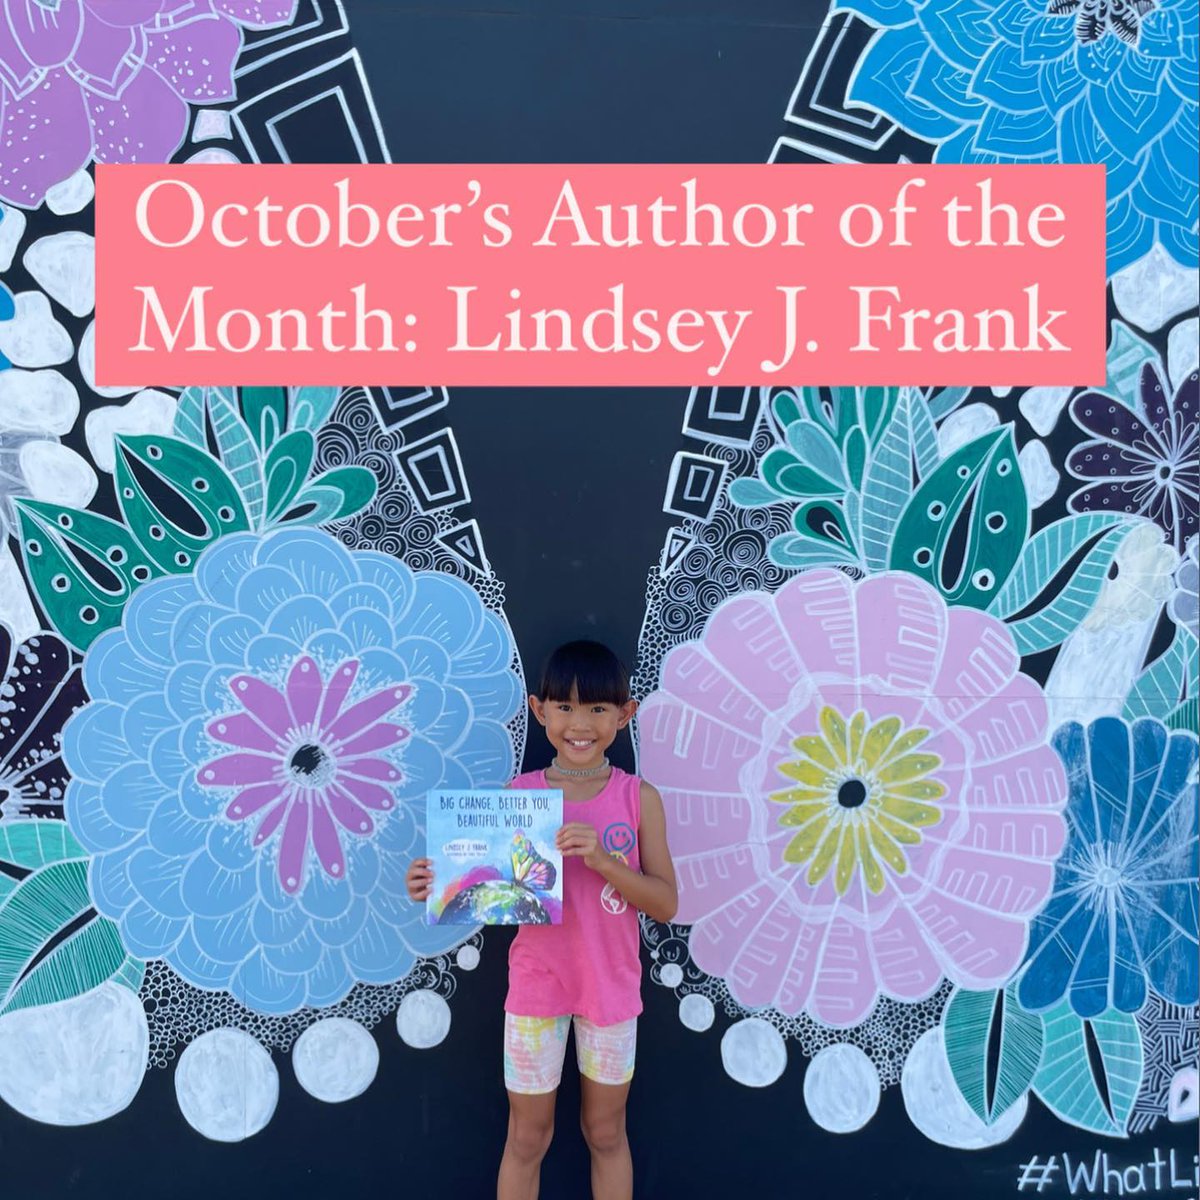 Another surprise for this week! 🦋
I feel so grateful to be #october's featured author for J.S. and Penny's #socialemotionallearning books! 
jsjenbooks.com/feature-of-the…

#SEL #mindfulness #childrensbooks #kidsbooks #kids #kidlit #socialemotional #socialemotionaldevelopment  #teaching